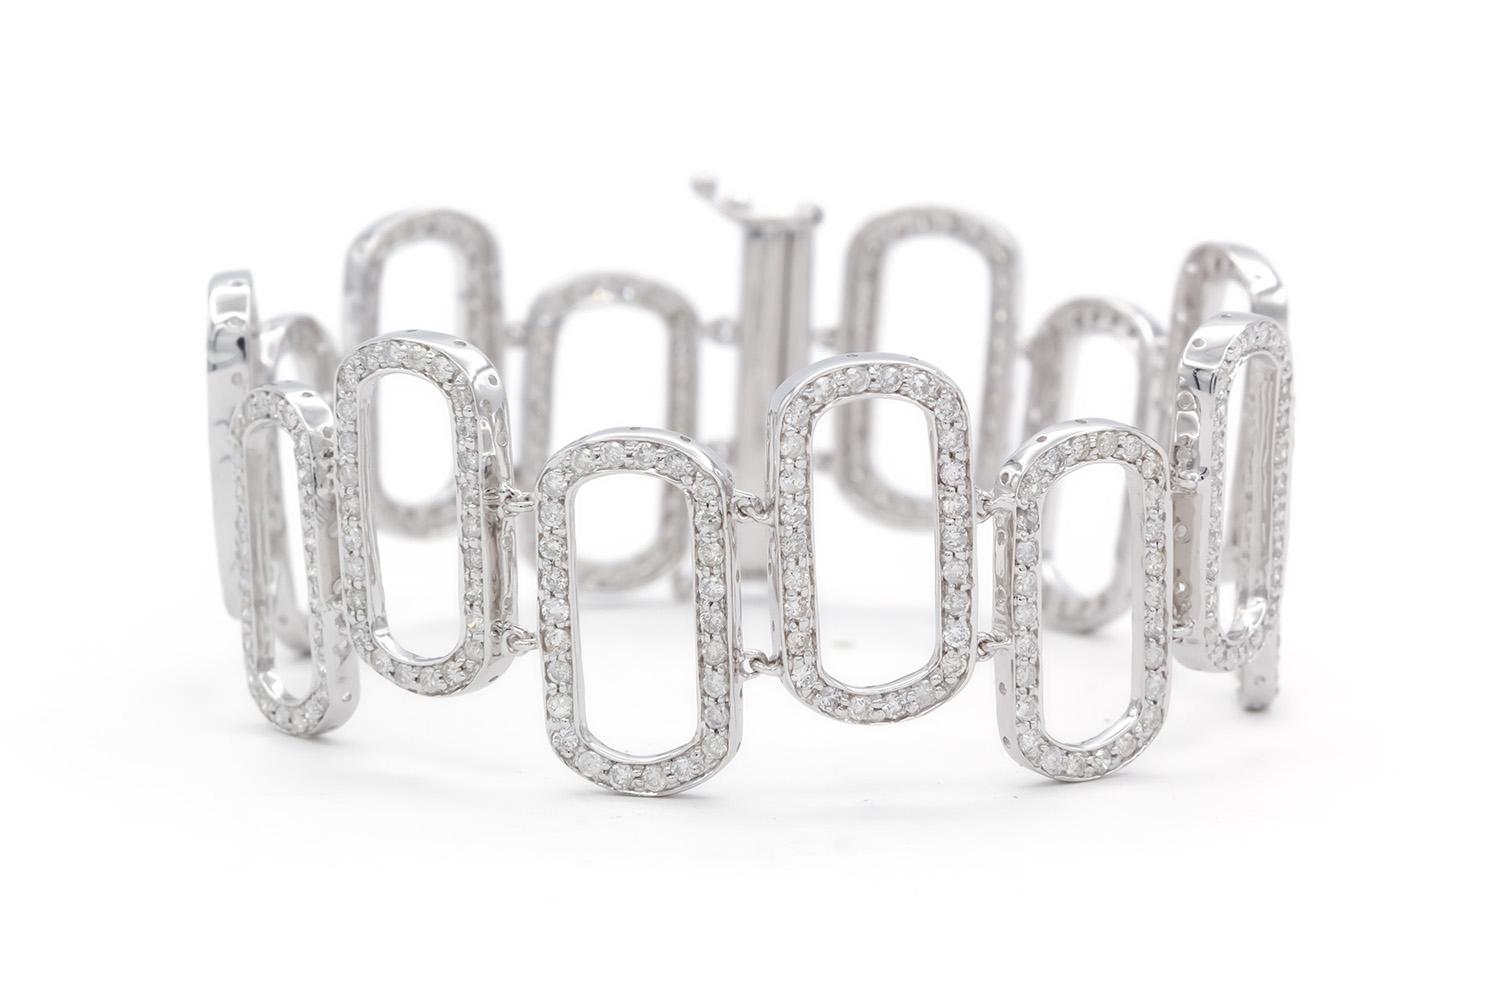 We are pleased to present this beautiful 18k White Gold & Diamond Oval Link Bracelet. It features an estimated 4.20ctw G-H/VS2-SI1 Round Brilliant Cut Diamonds set in this 18k white gold oval link bracelet. The bracelet measures 6.75″ long and